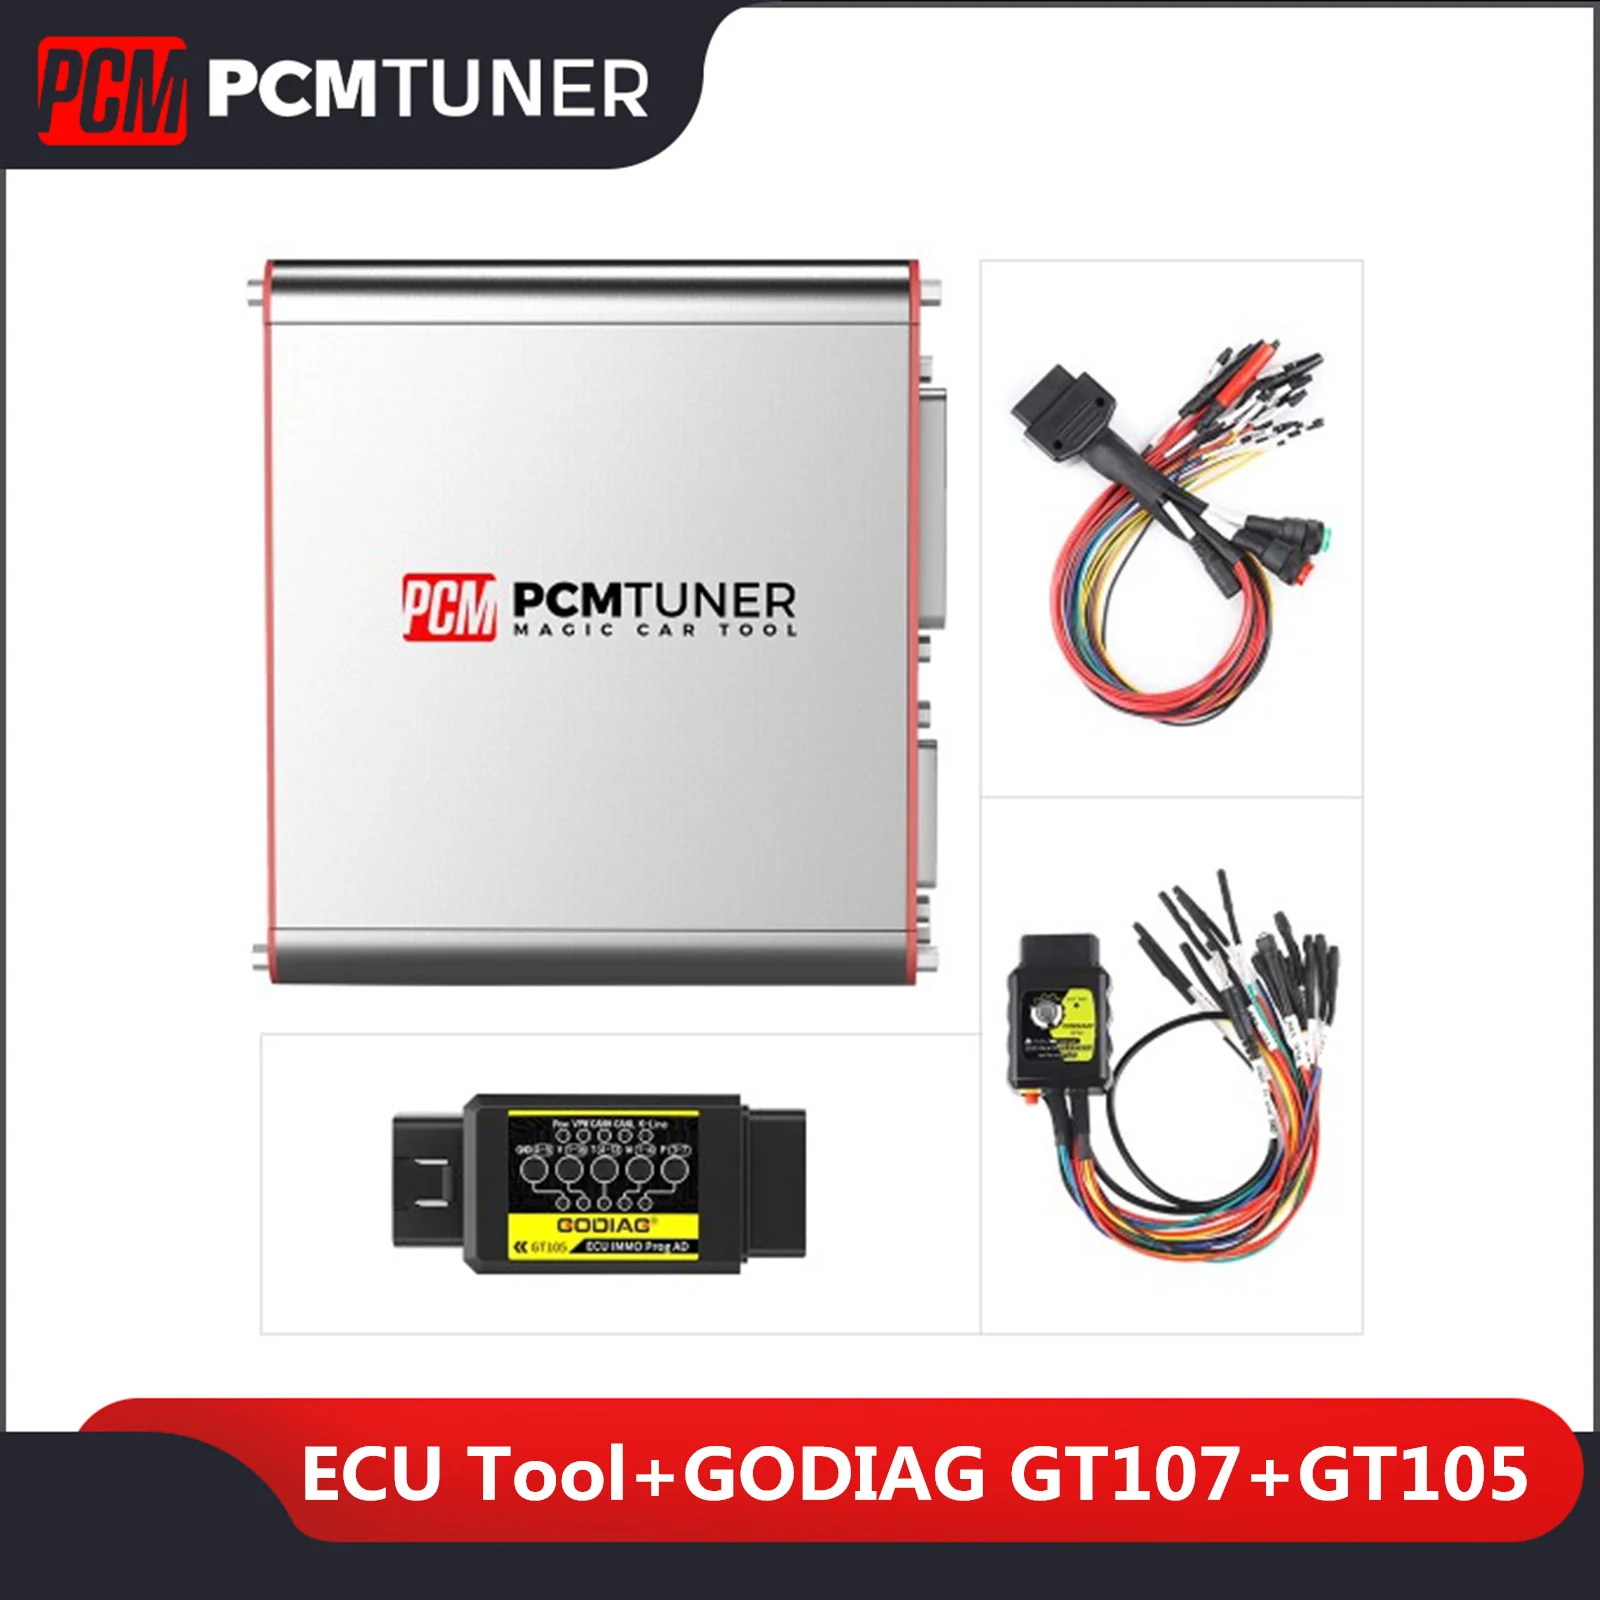 

PCMtuner ECU Programmer Tuning Tool +Godiag GT107 DSG Gearbox Data Read/Write Adapter with GT105 + Breakout Tricore Cable